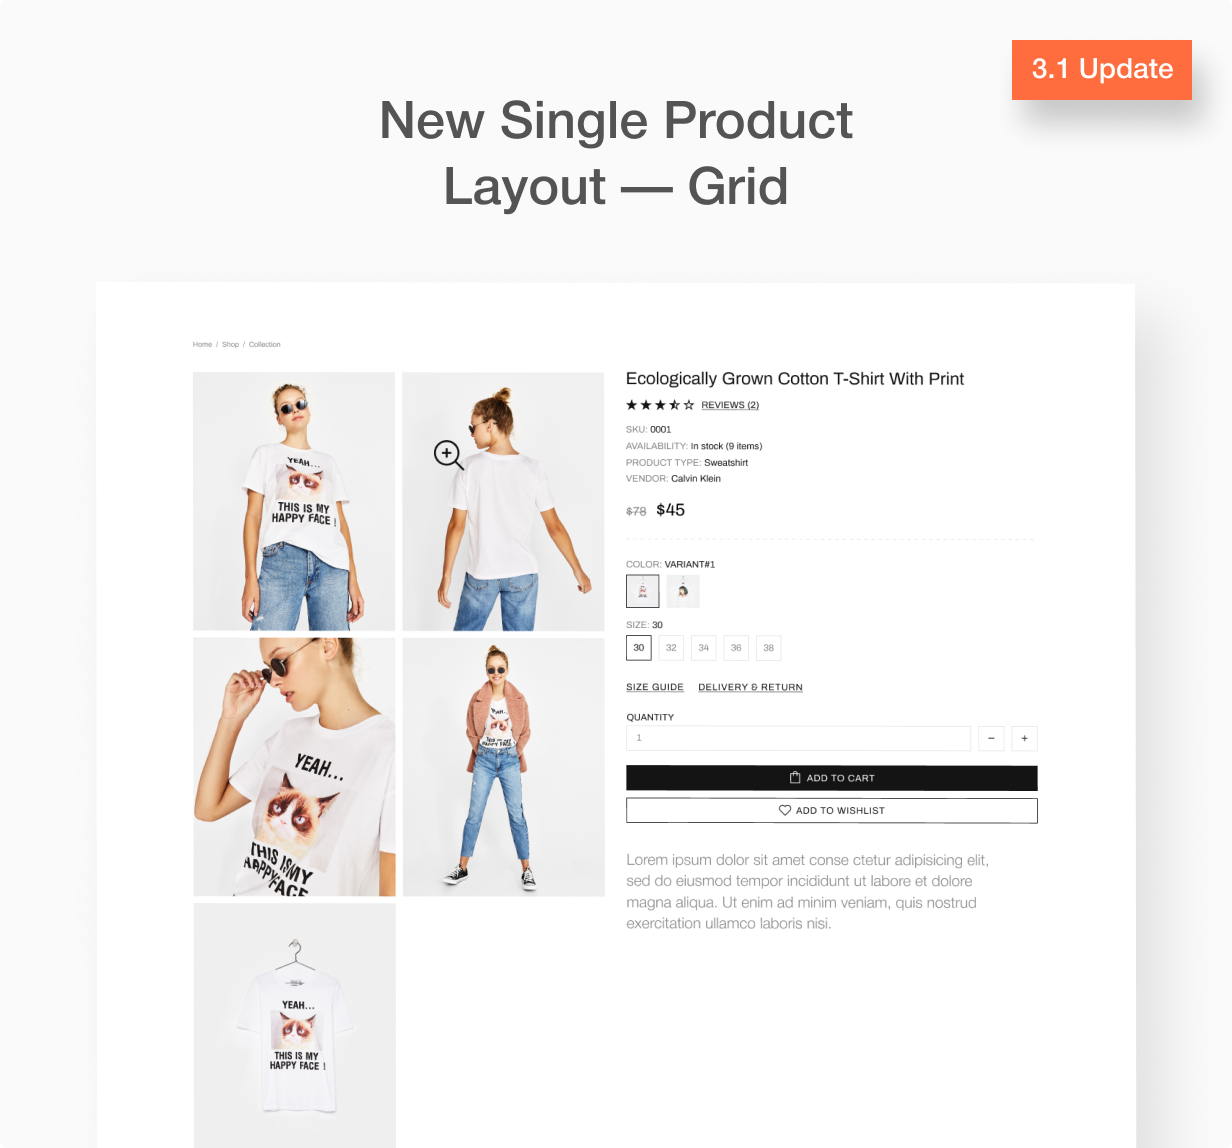 Update 3.1 Product image gallery as a grid